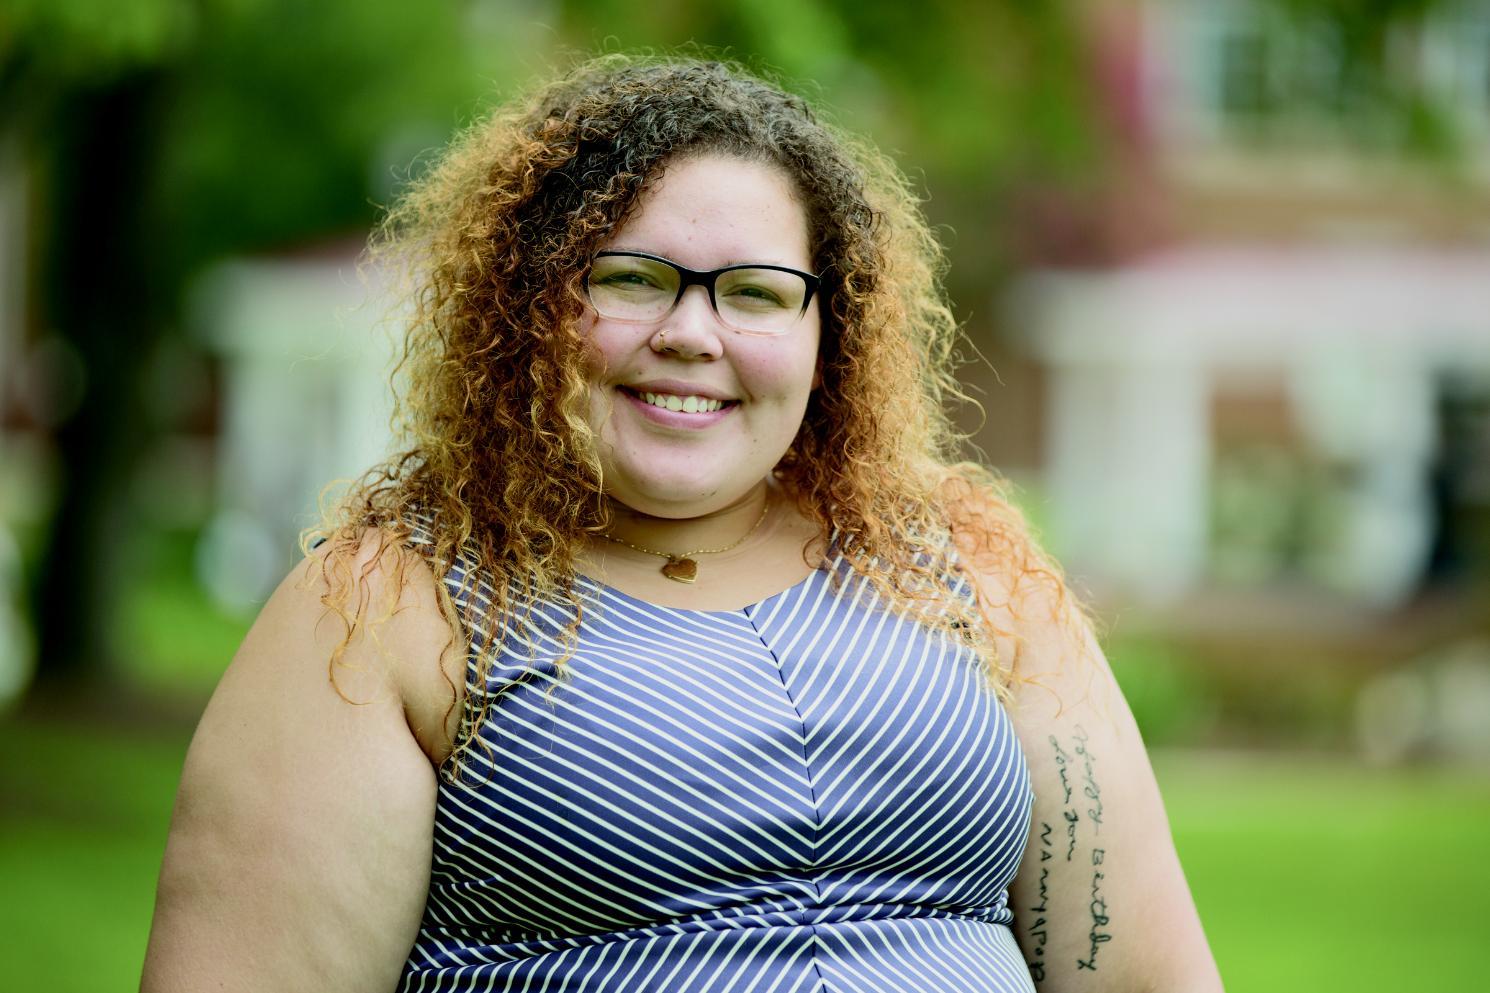 Amber Litchford ’17 is passionate about making a difference in people’s lives.